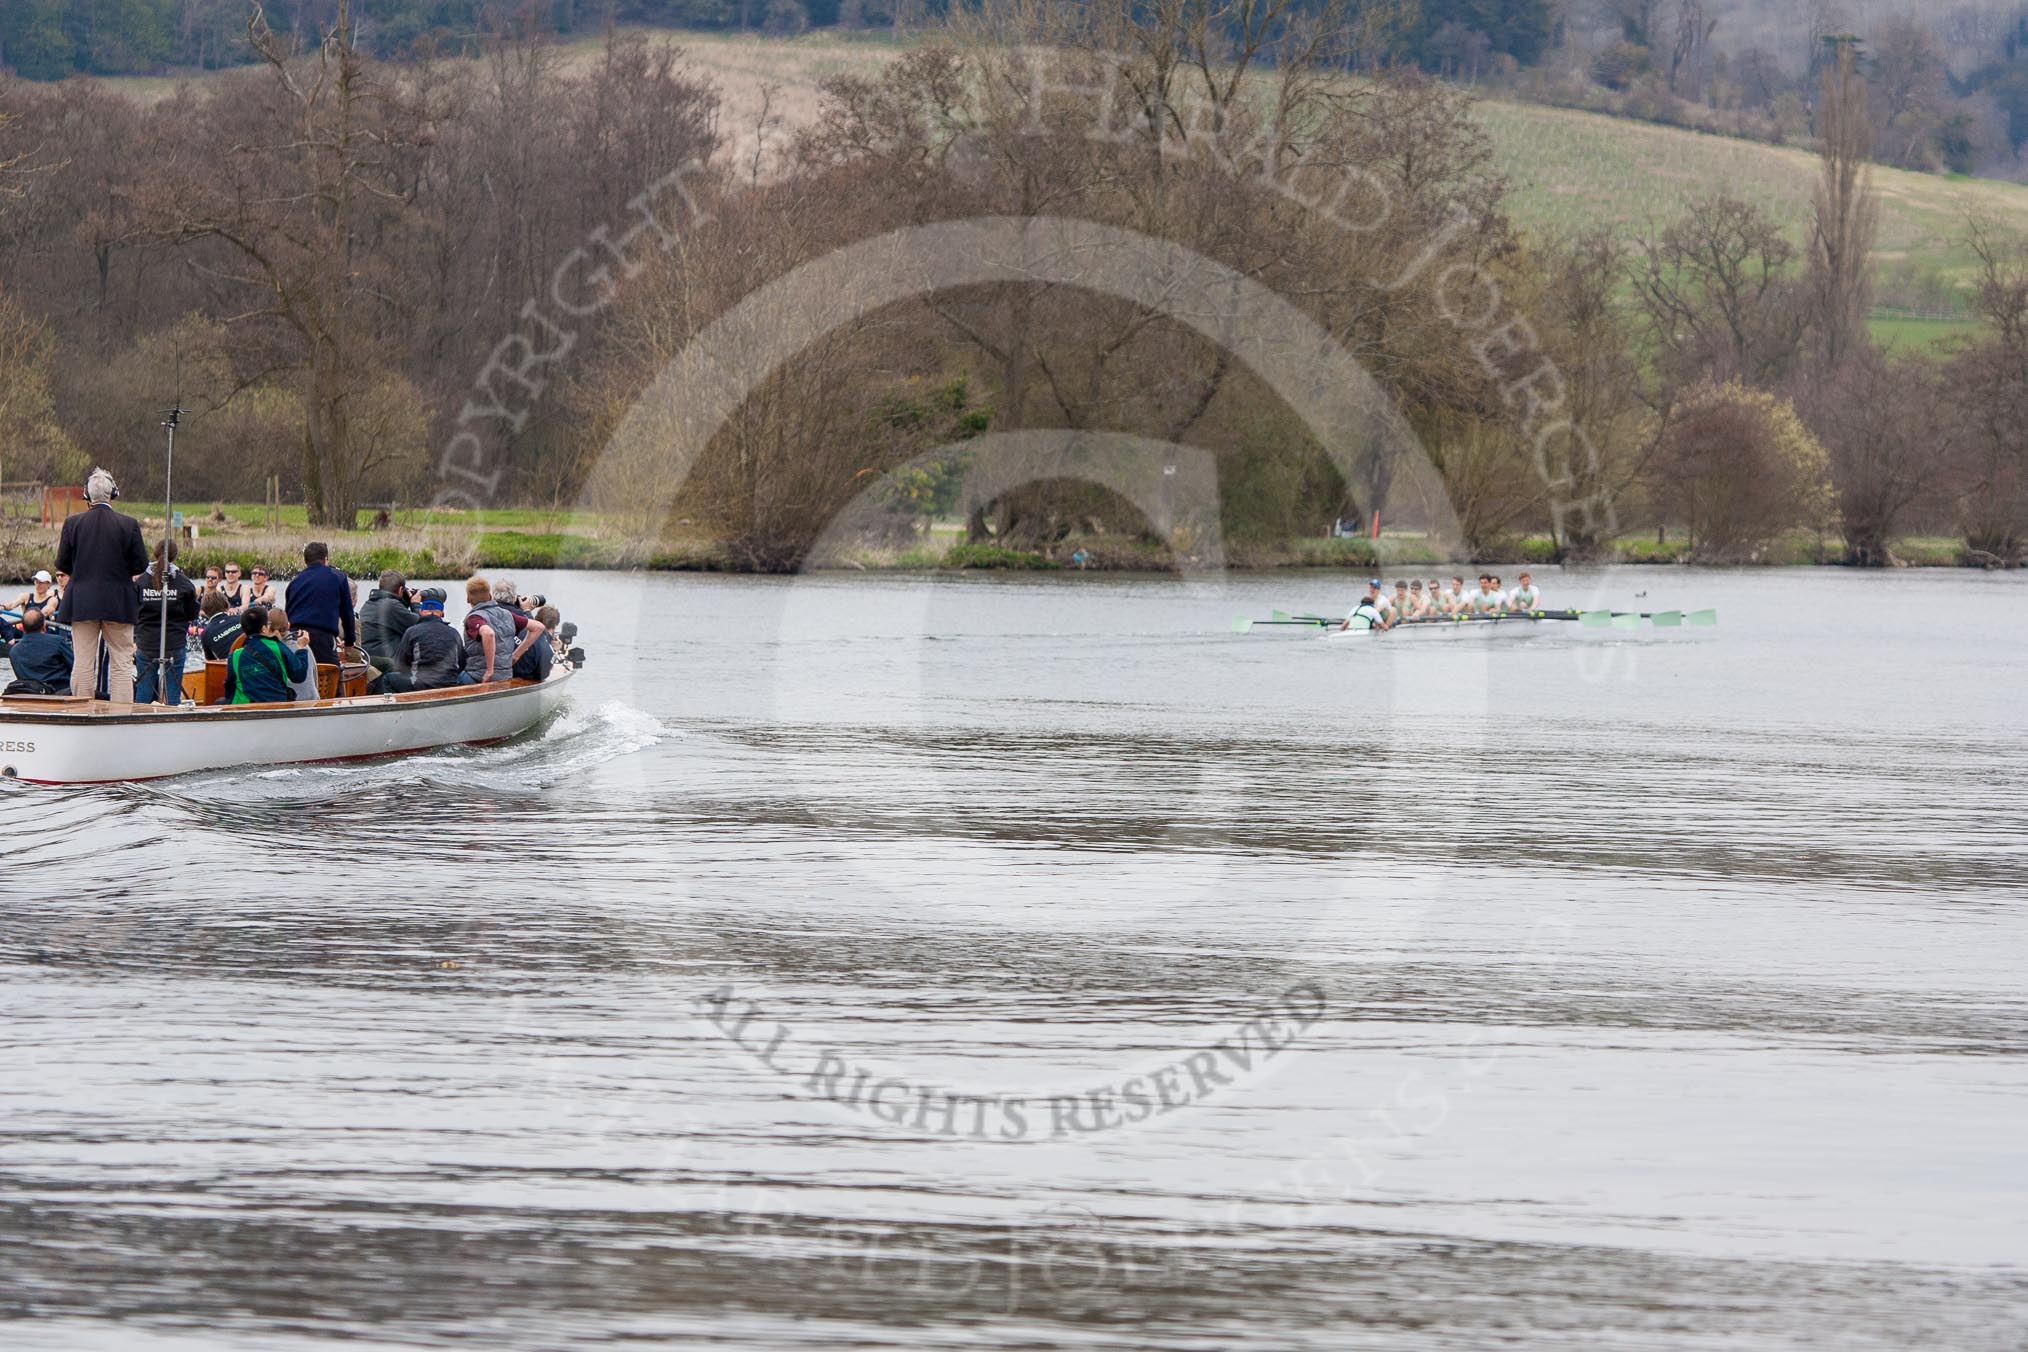 The Women's Boat Race and Henley Boat Races 2014: The Lightweight Men's Boat Race - OULRC vs CULRC. The leading Cambridge boat is approaching the finish line, the press launch is almost covering the view of the Oxford boat..
River Thames,
Henley-on-Thames,
Buckinghamshire,
United Kingdom,
on 30 March 2014 at 15:41, image #395